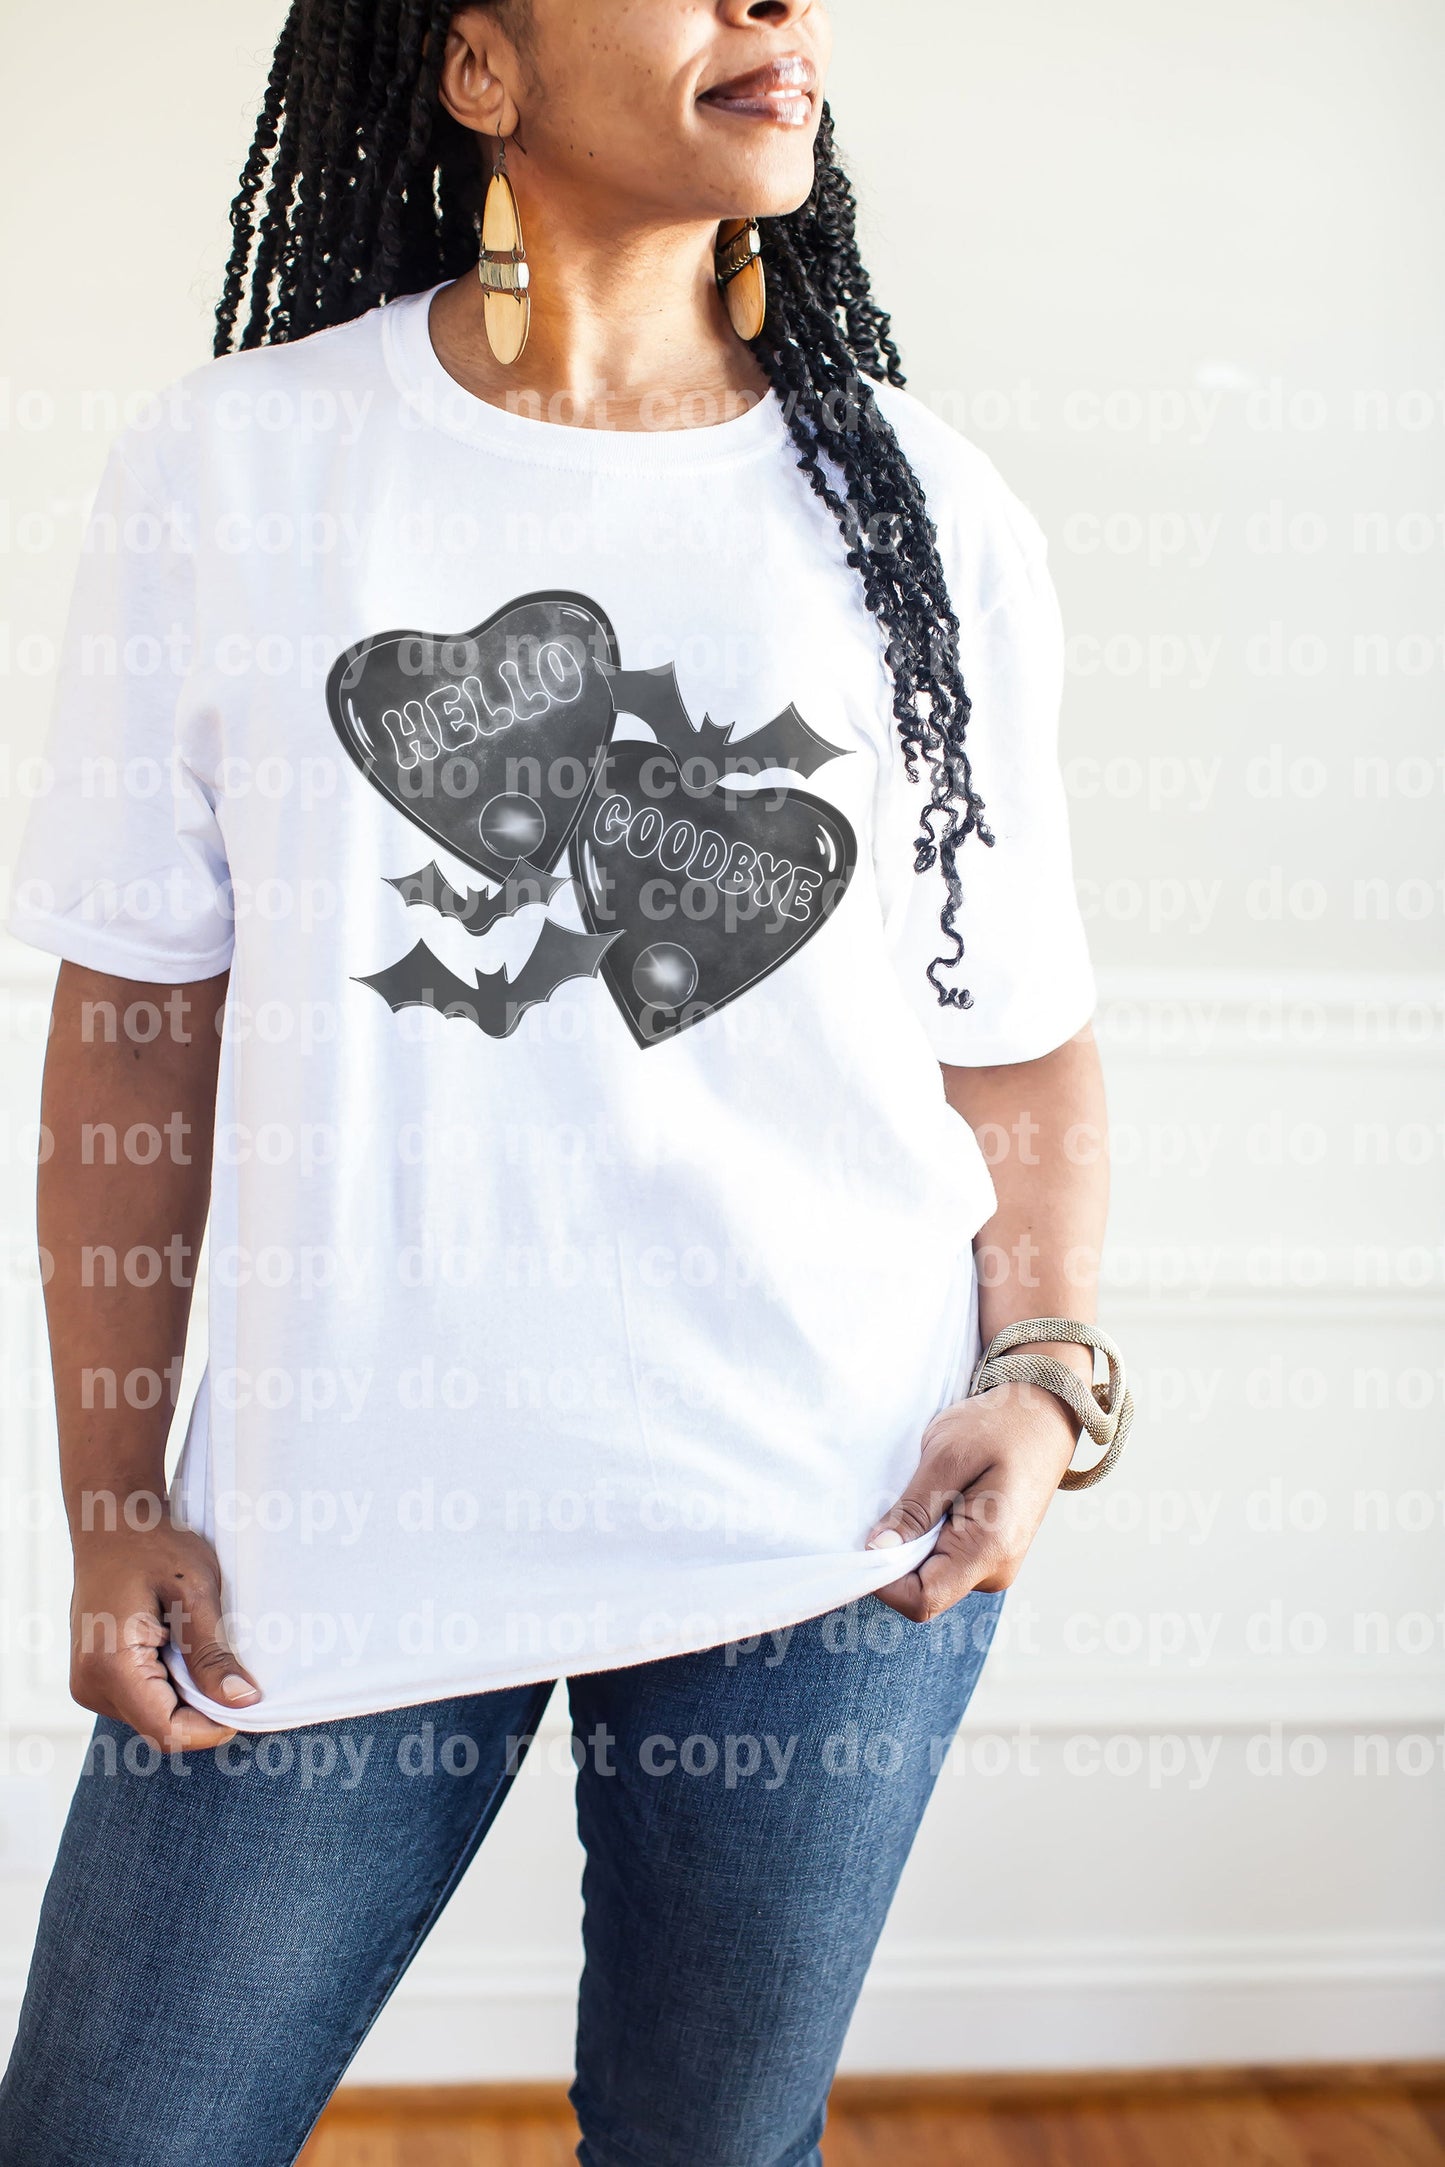 Hello Goodbye In Various Colors Dream Print or Sublimation Print